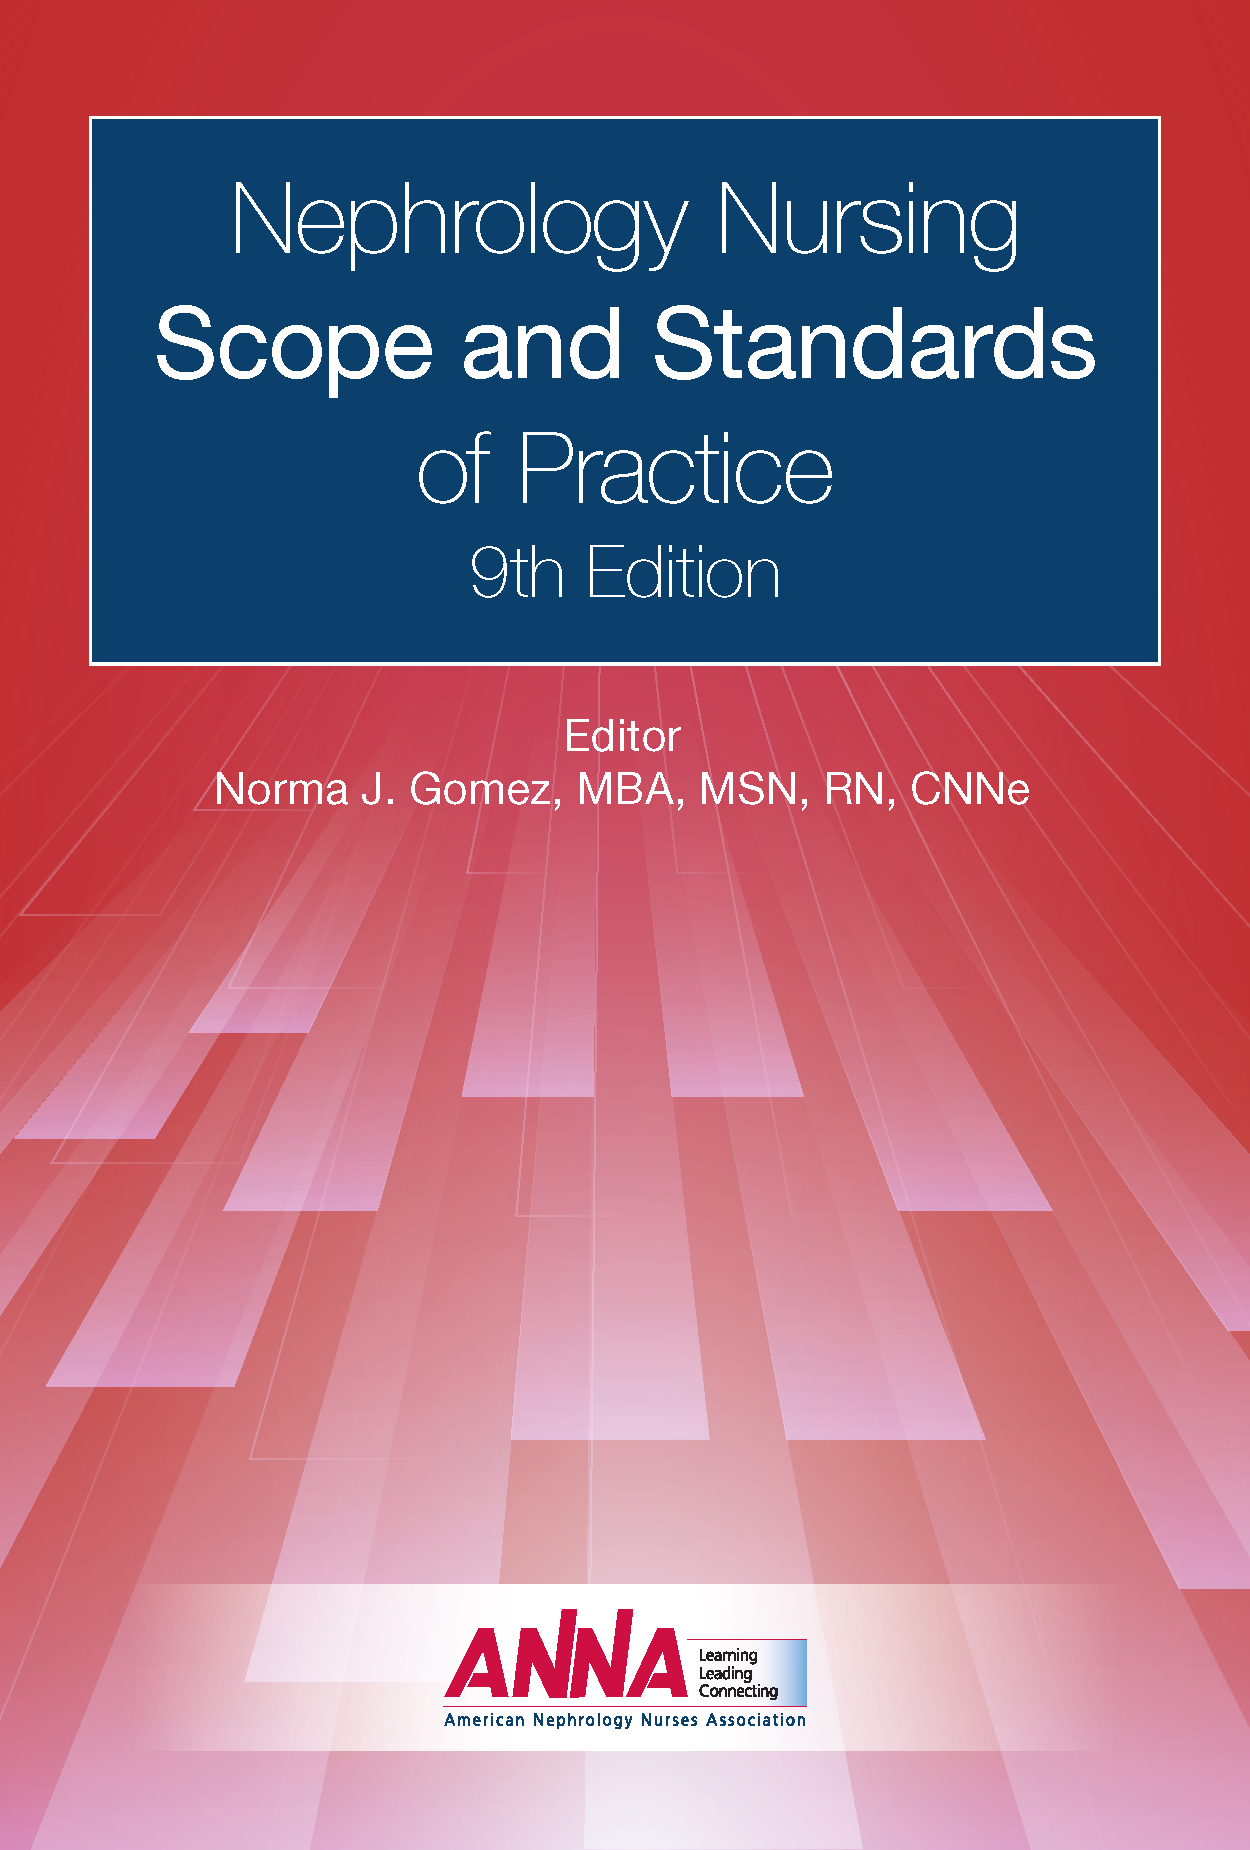 Nephrology Nursing Scope and Standards of Practice, 9th Edition, 2022